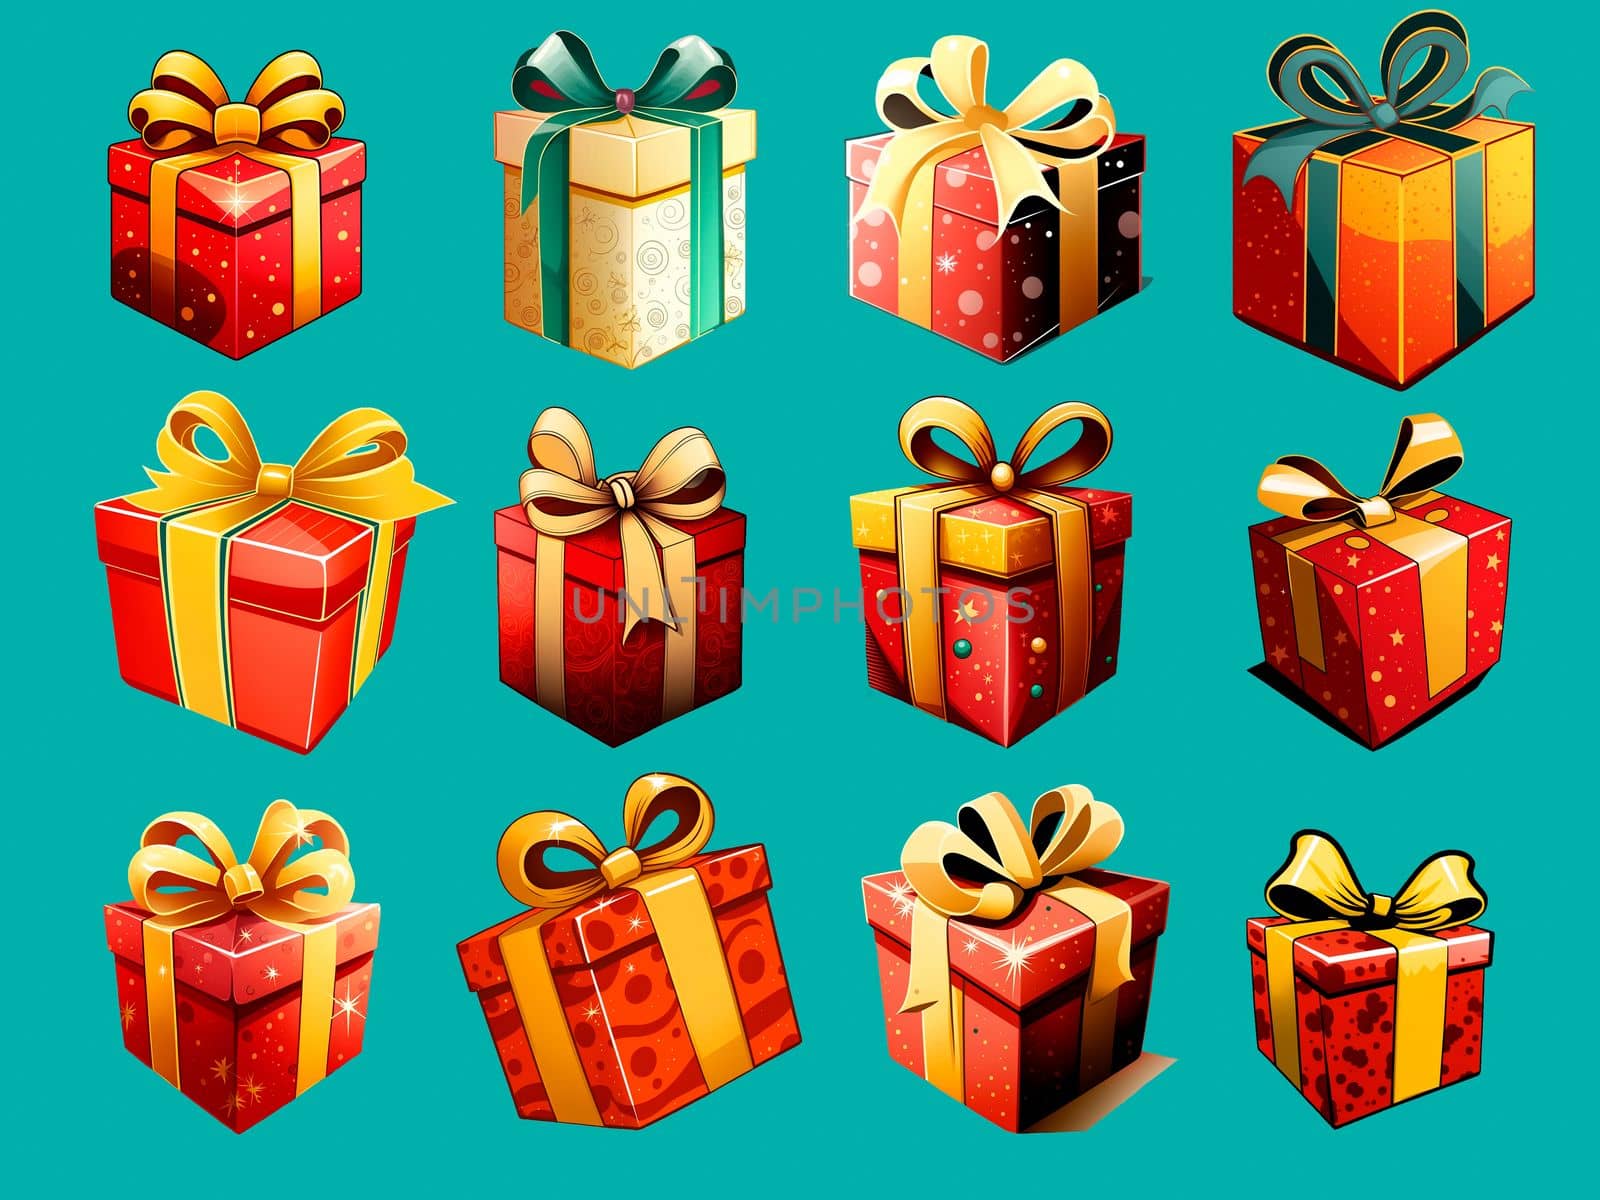 A set of icons with the image of Christmas gifts by NeuroSky